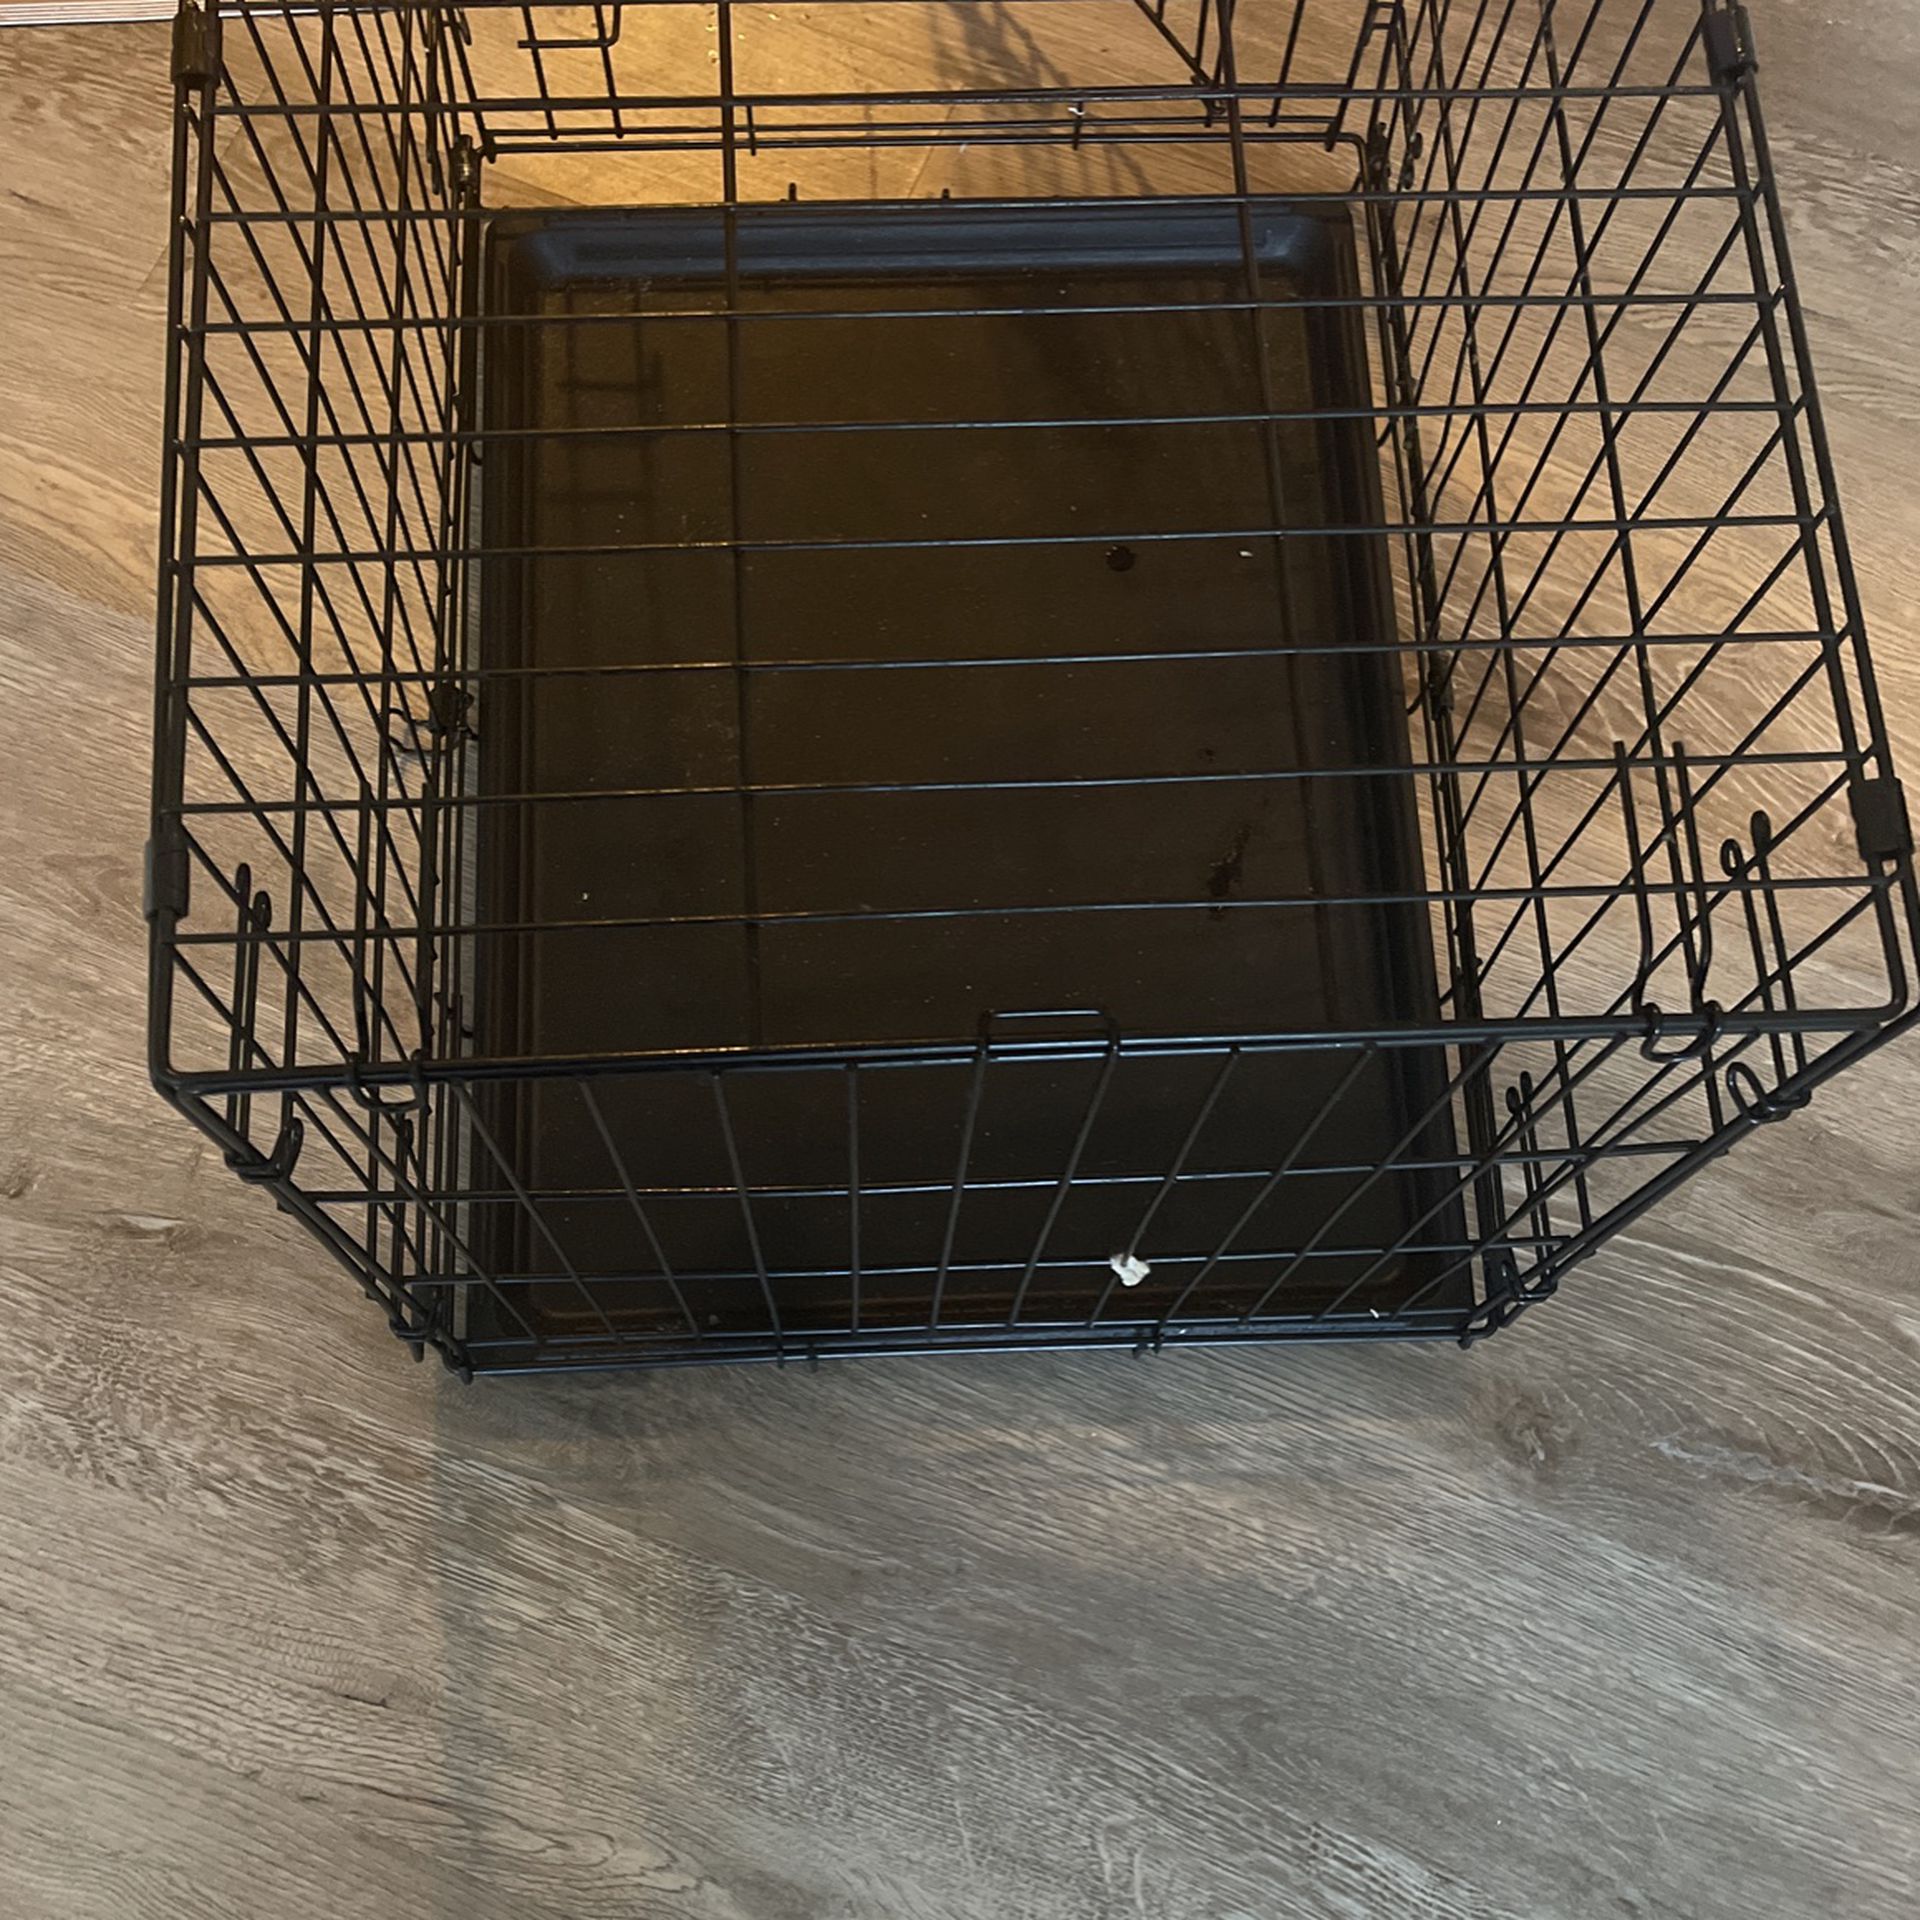 Dog Kennel And Dog Bowl 